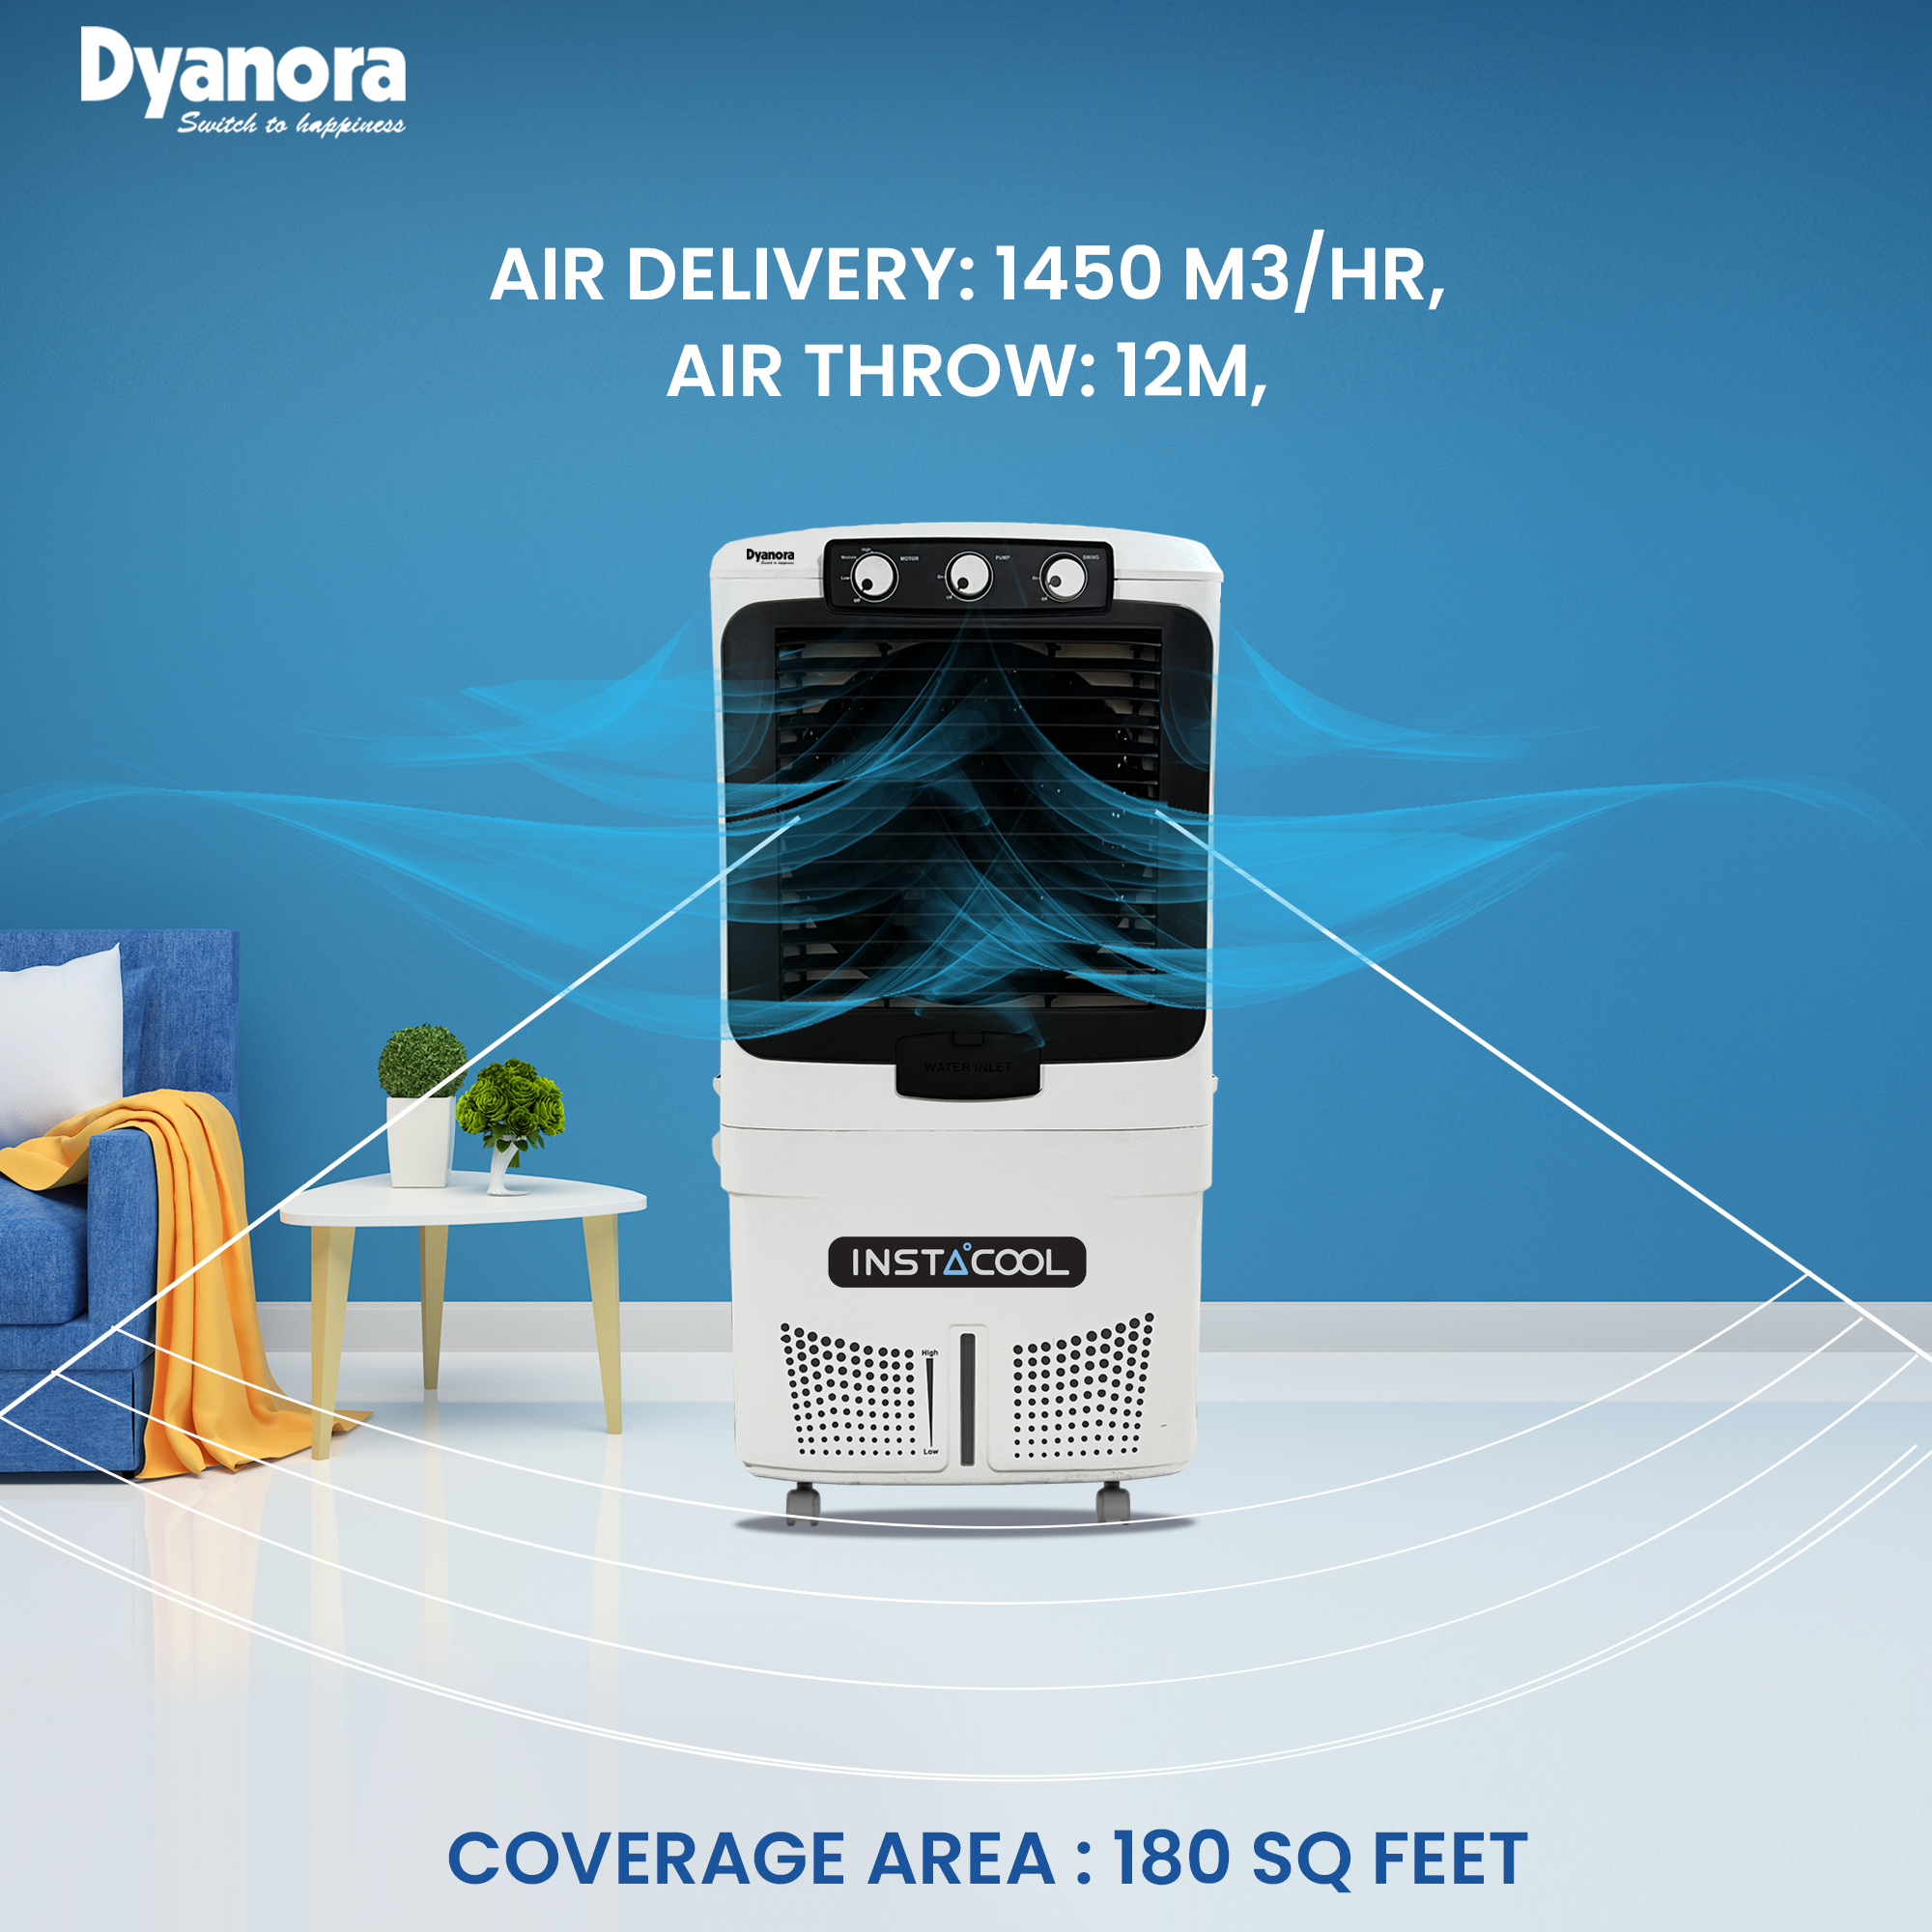 Dyanora 80 L Desert Air Cooler with InstaCool Technology (DY-CL80-01-BW)